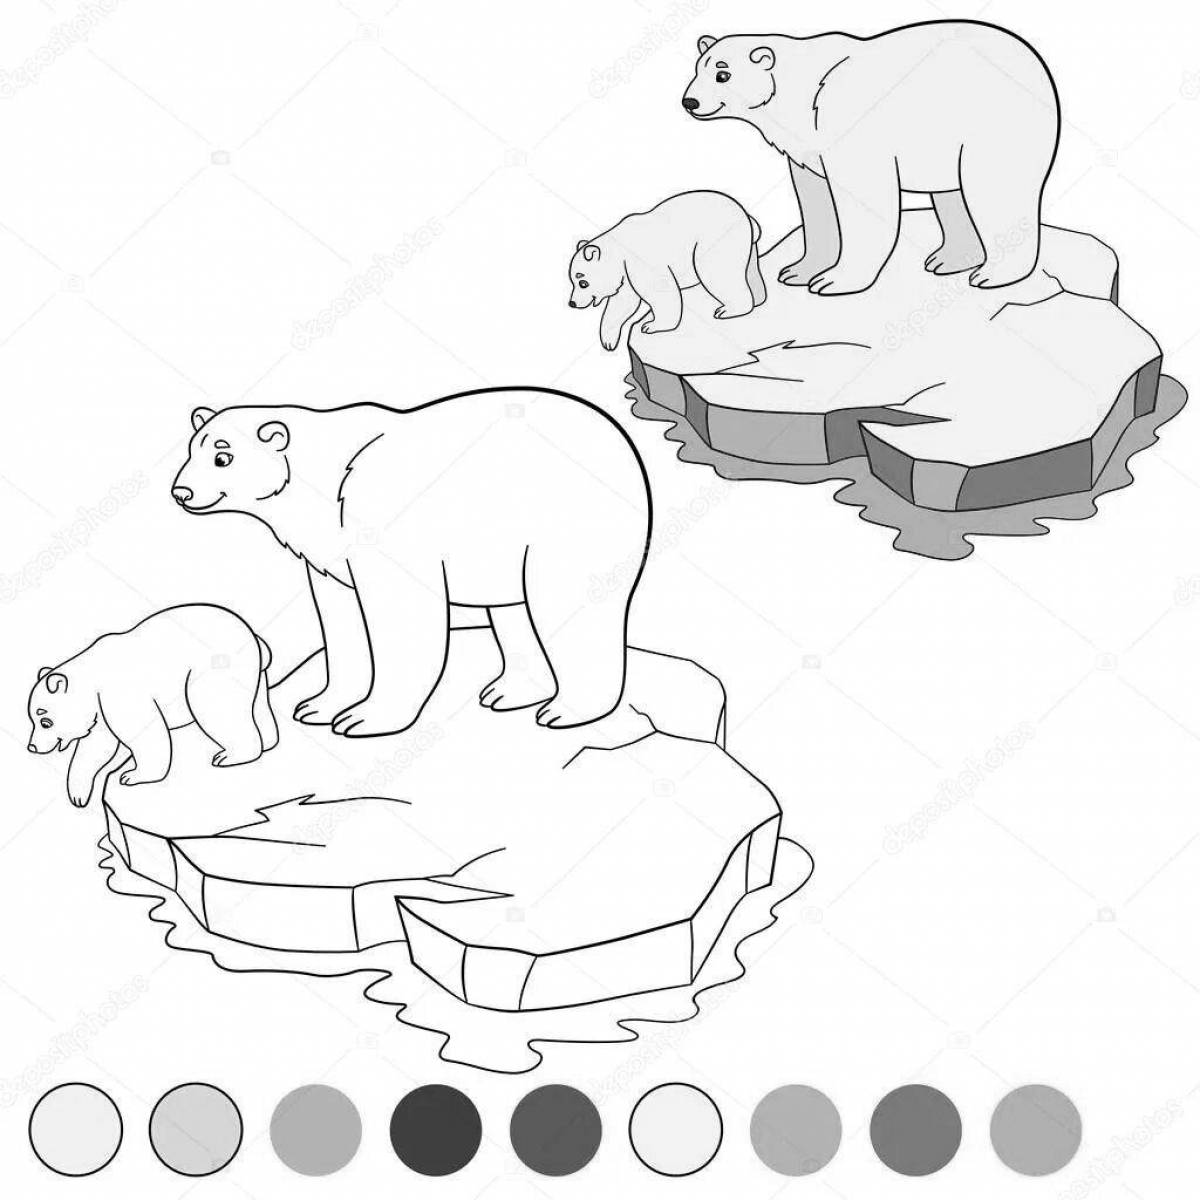 Great ice floe coloring page for kids